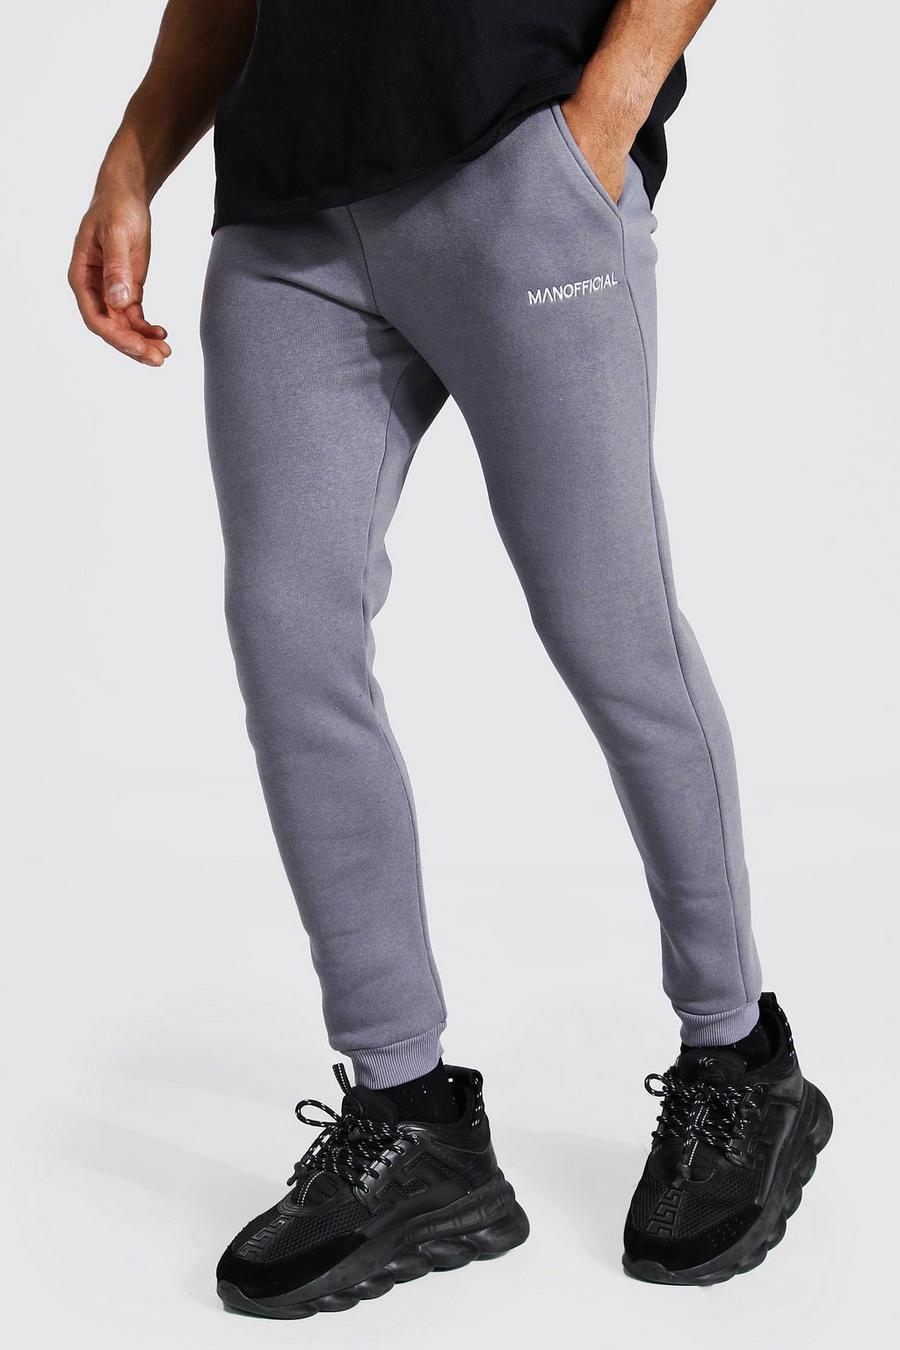 Charcoal Skinny Man Official Double Waistband Joggers image number 1